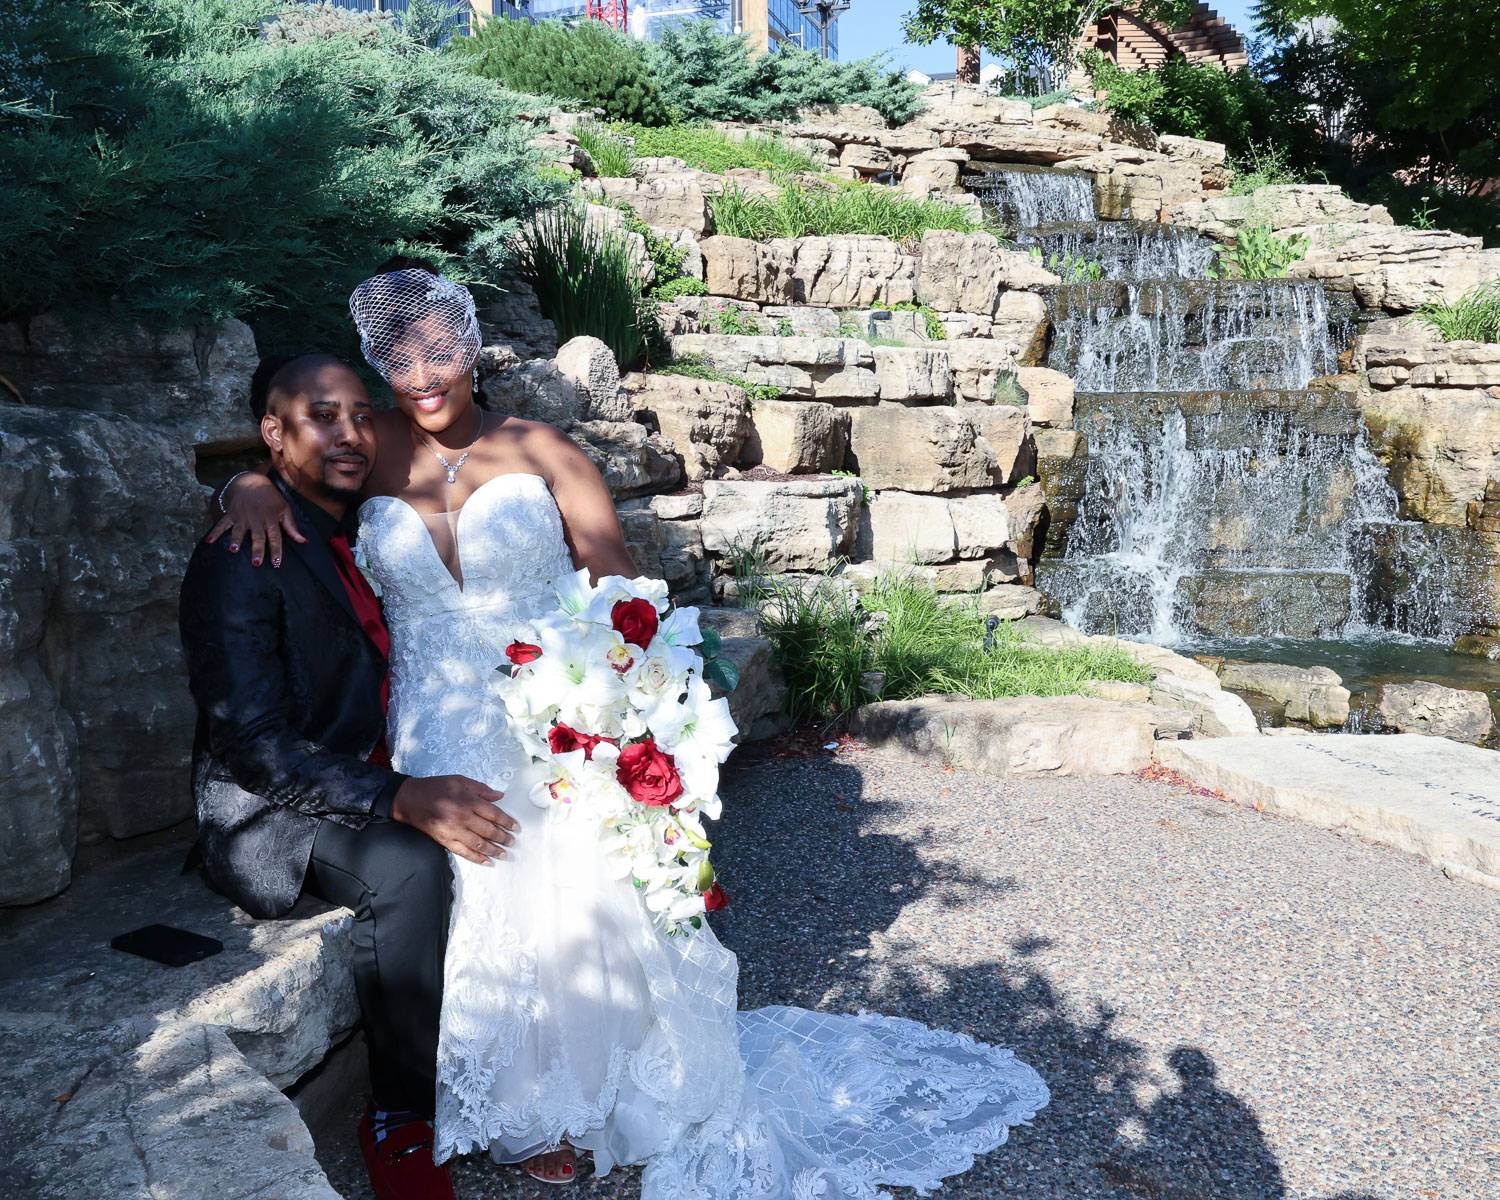 The bride and groom sitting on a stone surface near a waterfall